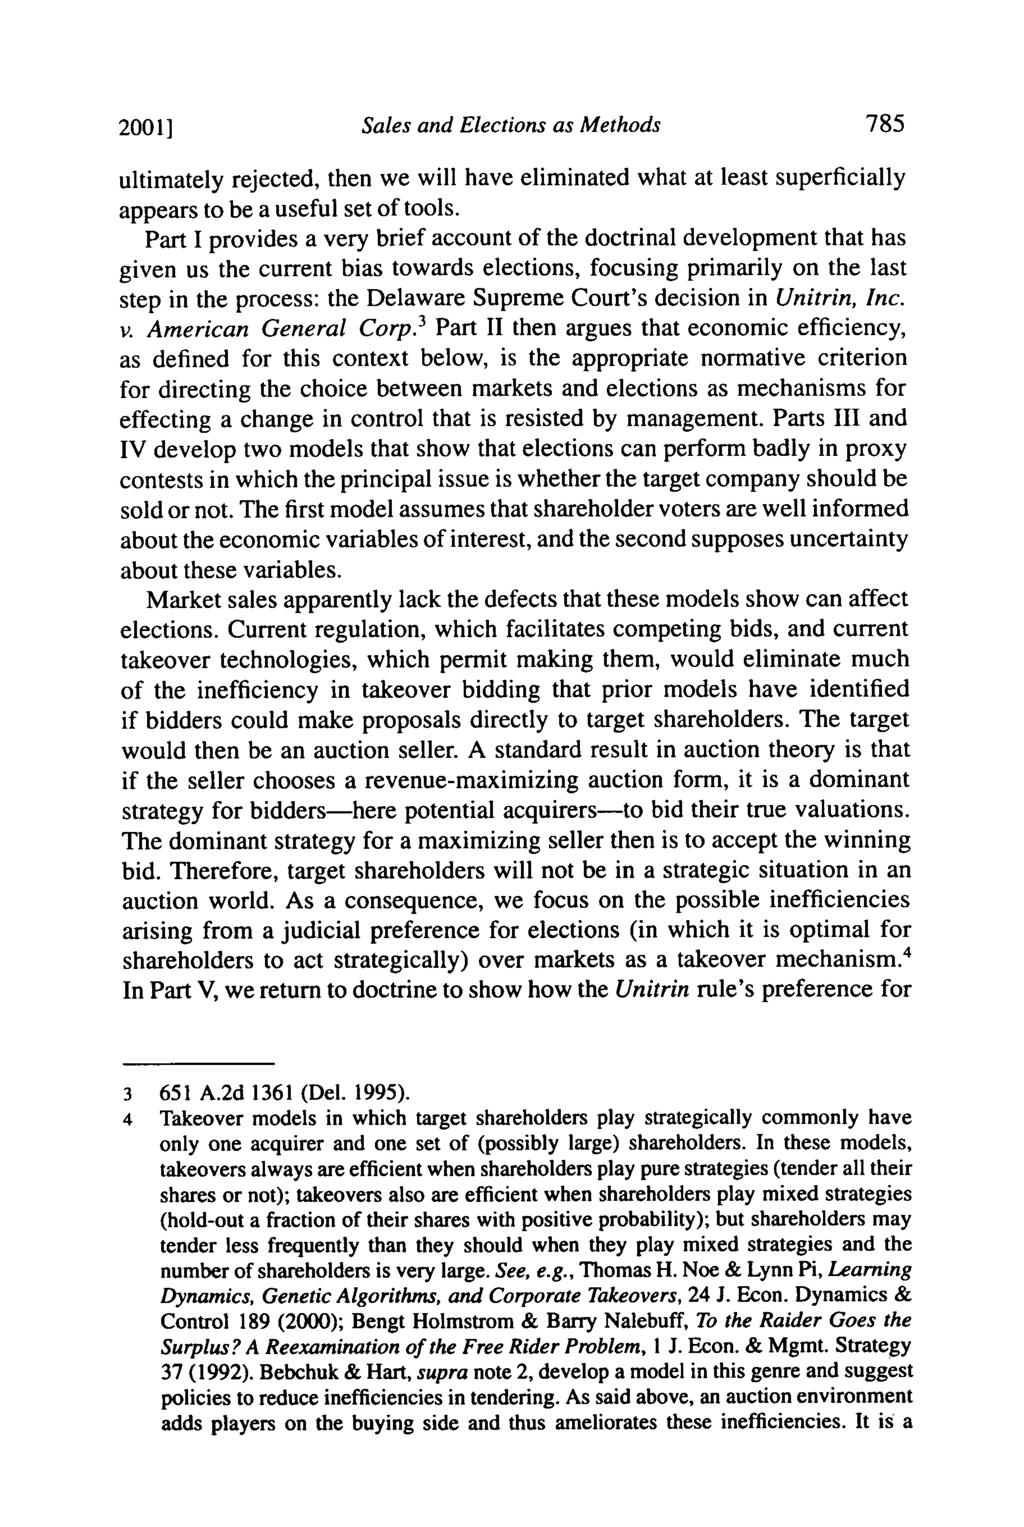 2001] Sales and Elections as Methods ultimately rejected, then we will have eliminated what at least superficially appears to be a useful set of tools.